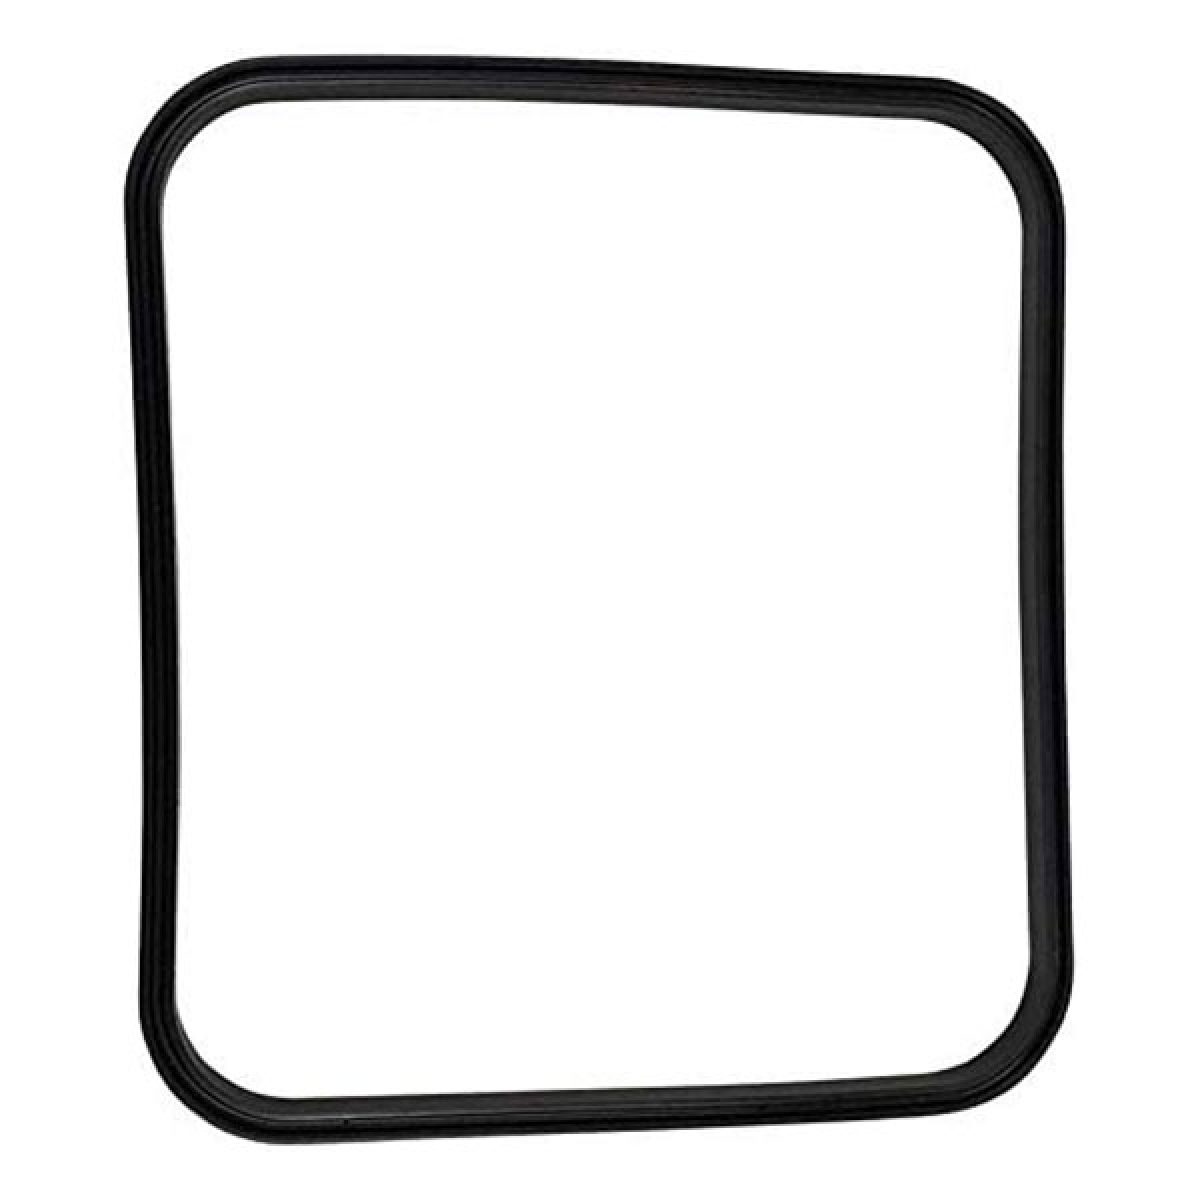 O-ring Gasket Replacement for Hayward®* Super Pump Lid Gasket SPX1600S O-177 